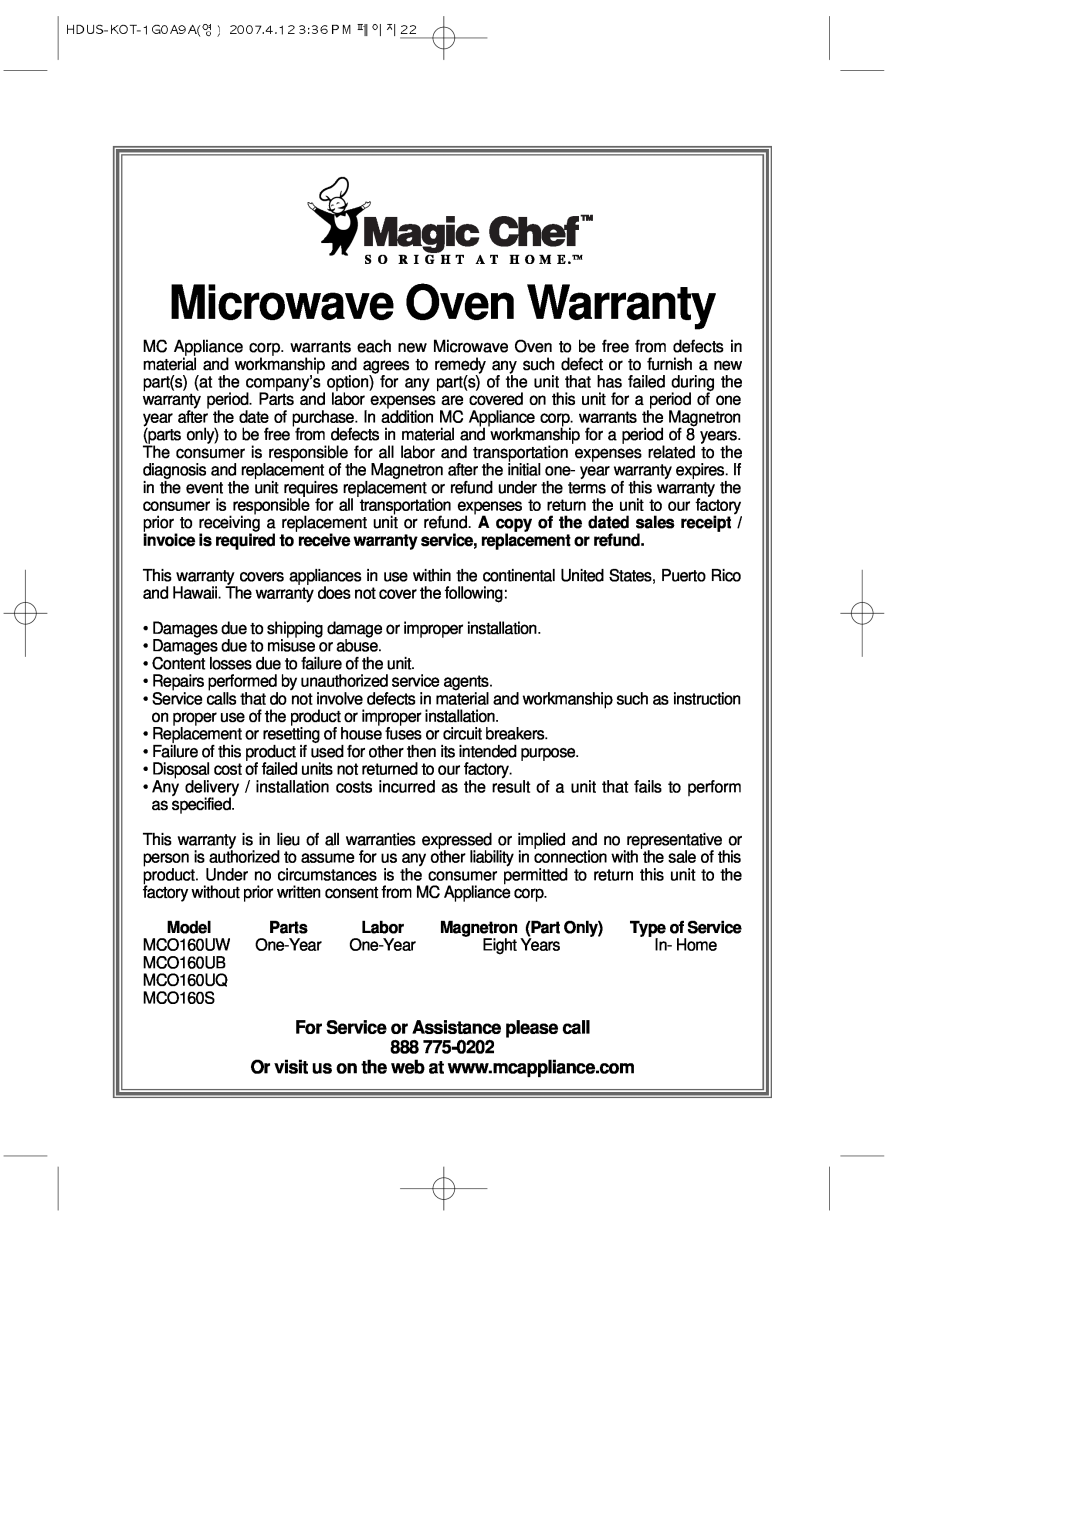 Magic Chef mco160uw, MCO160UQ, mco160ub, MCO160S Microwave Oven Warranty, For Service or Assistance please call 